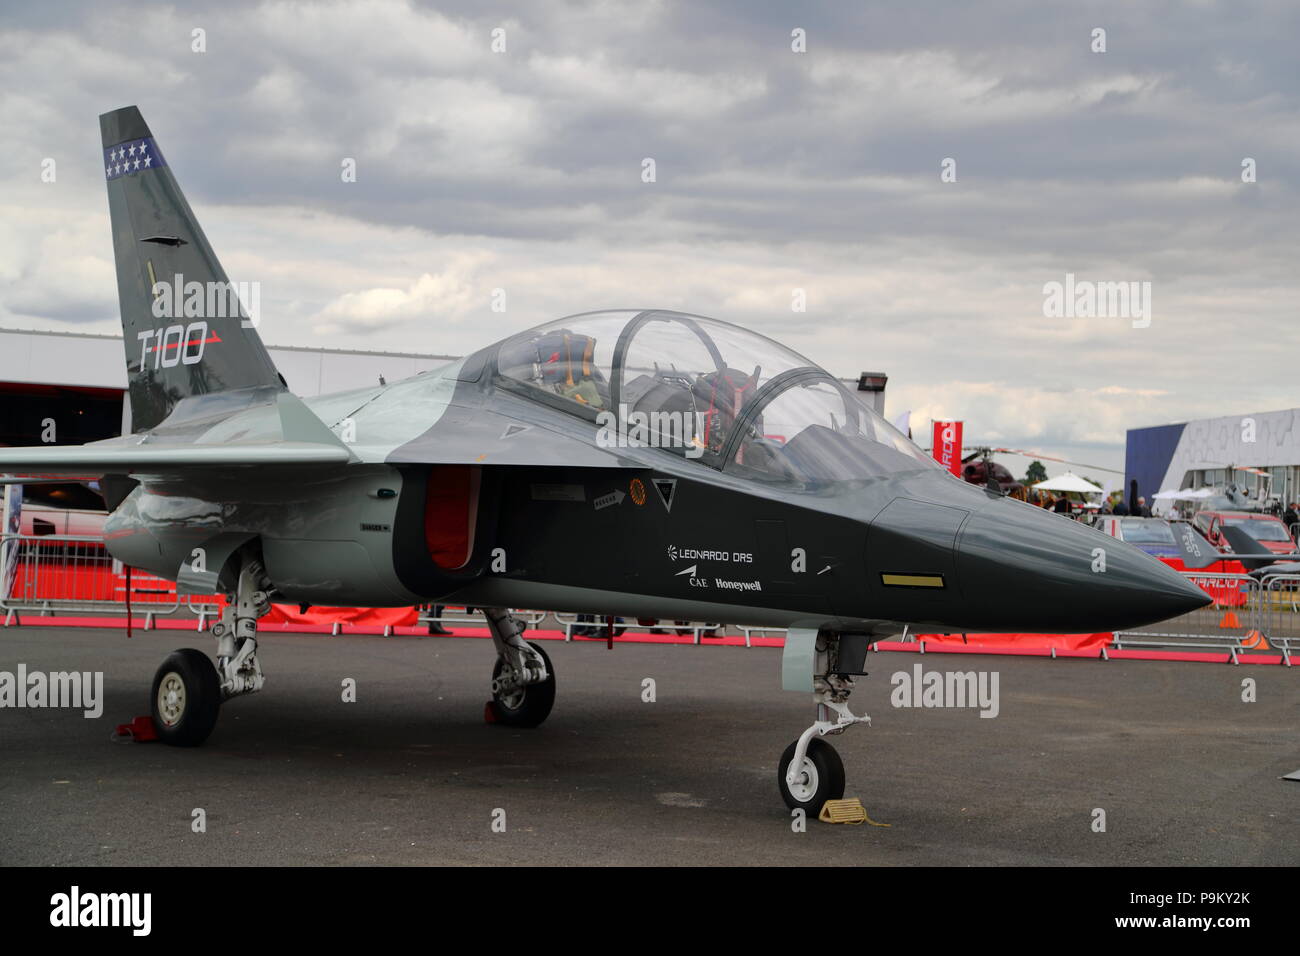 The aircraft manufacturers and suppliers displayed their latest technology at the stands. During the flying display the aircraft showed their agility and manoeuvrability of their latest aircraft during today's flying display . Credit: Uwe Deffner/Alamy Live News Stock Photo